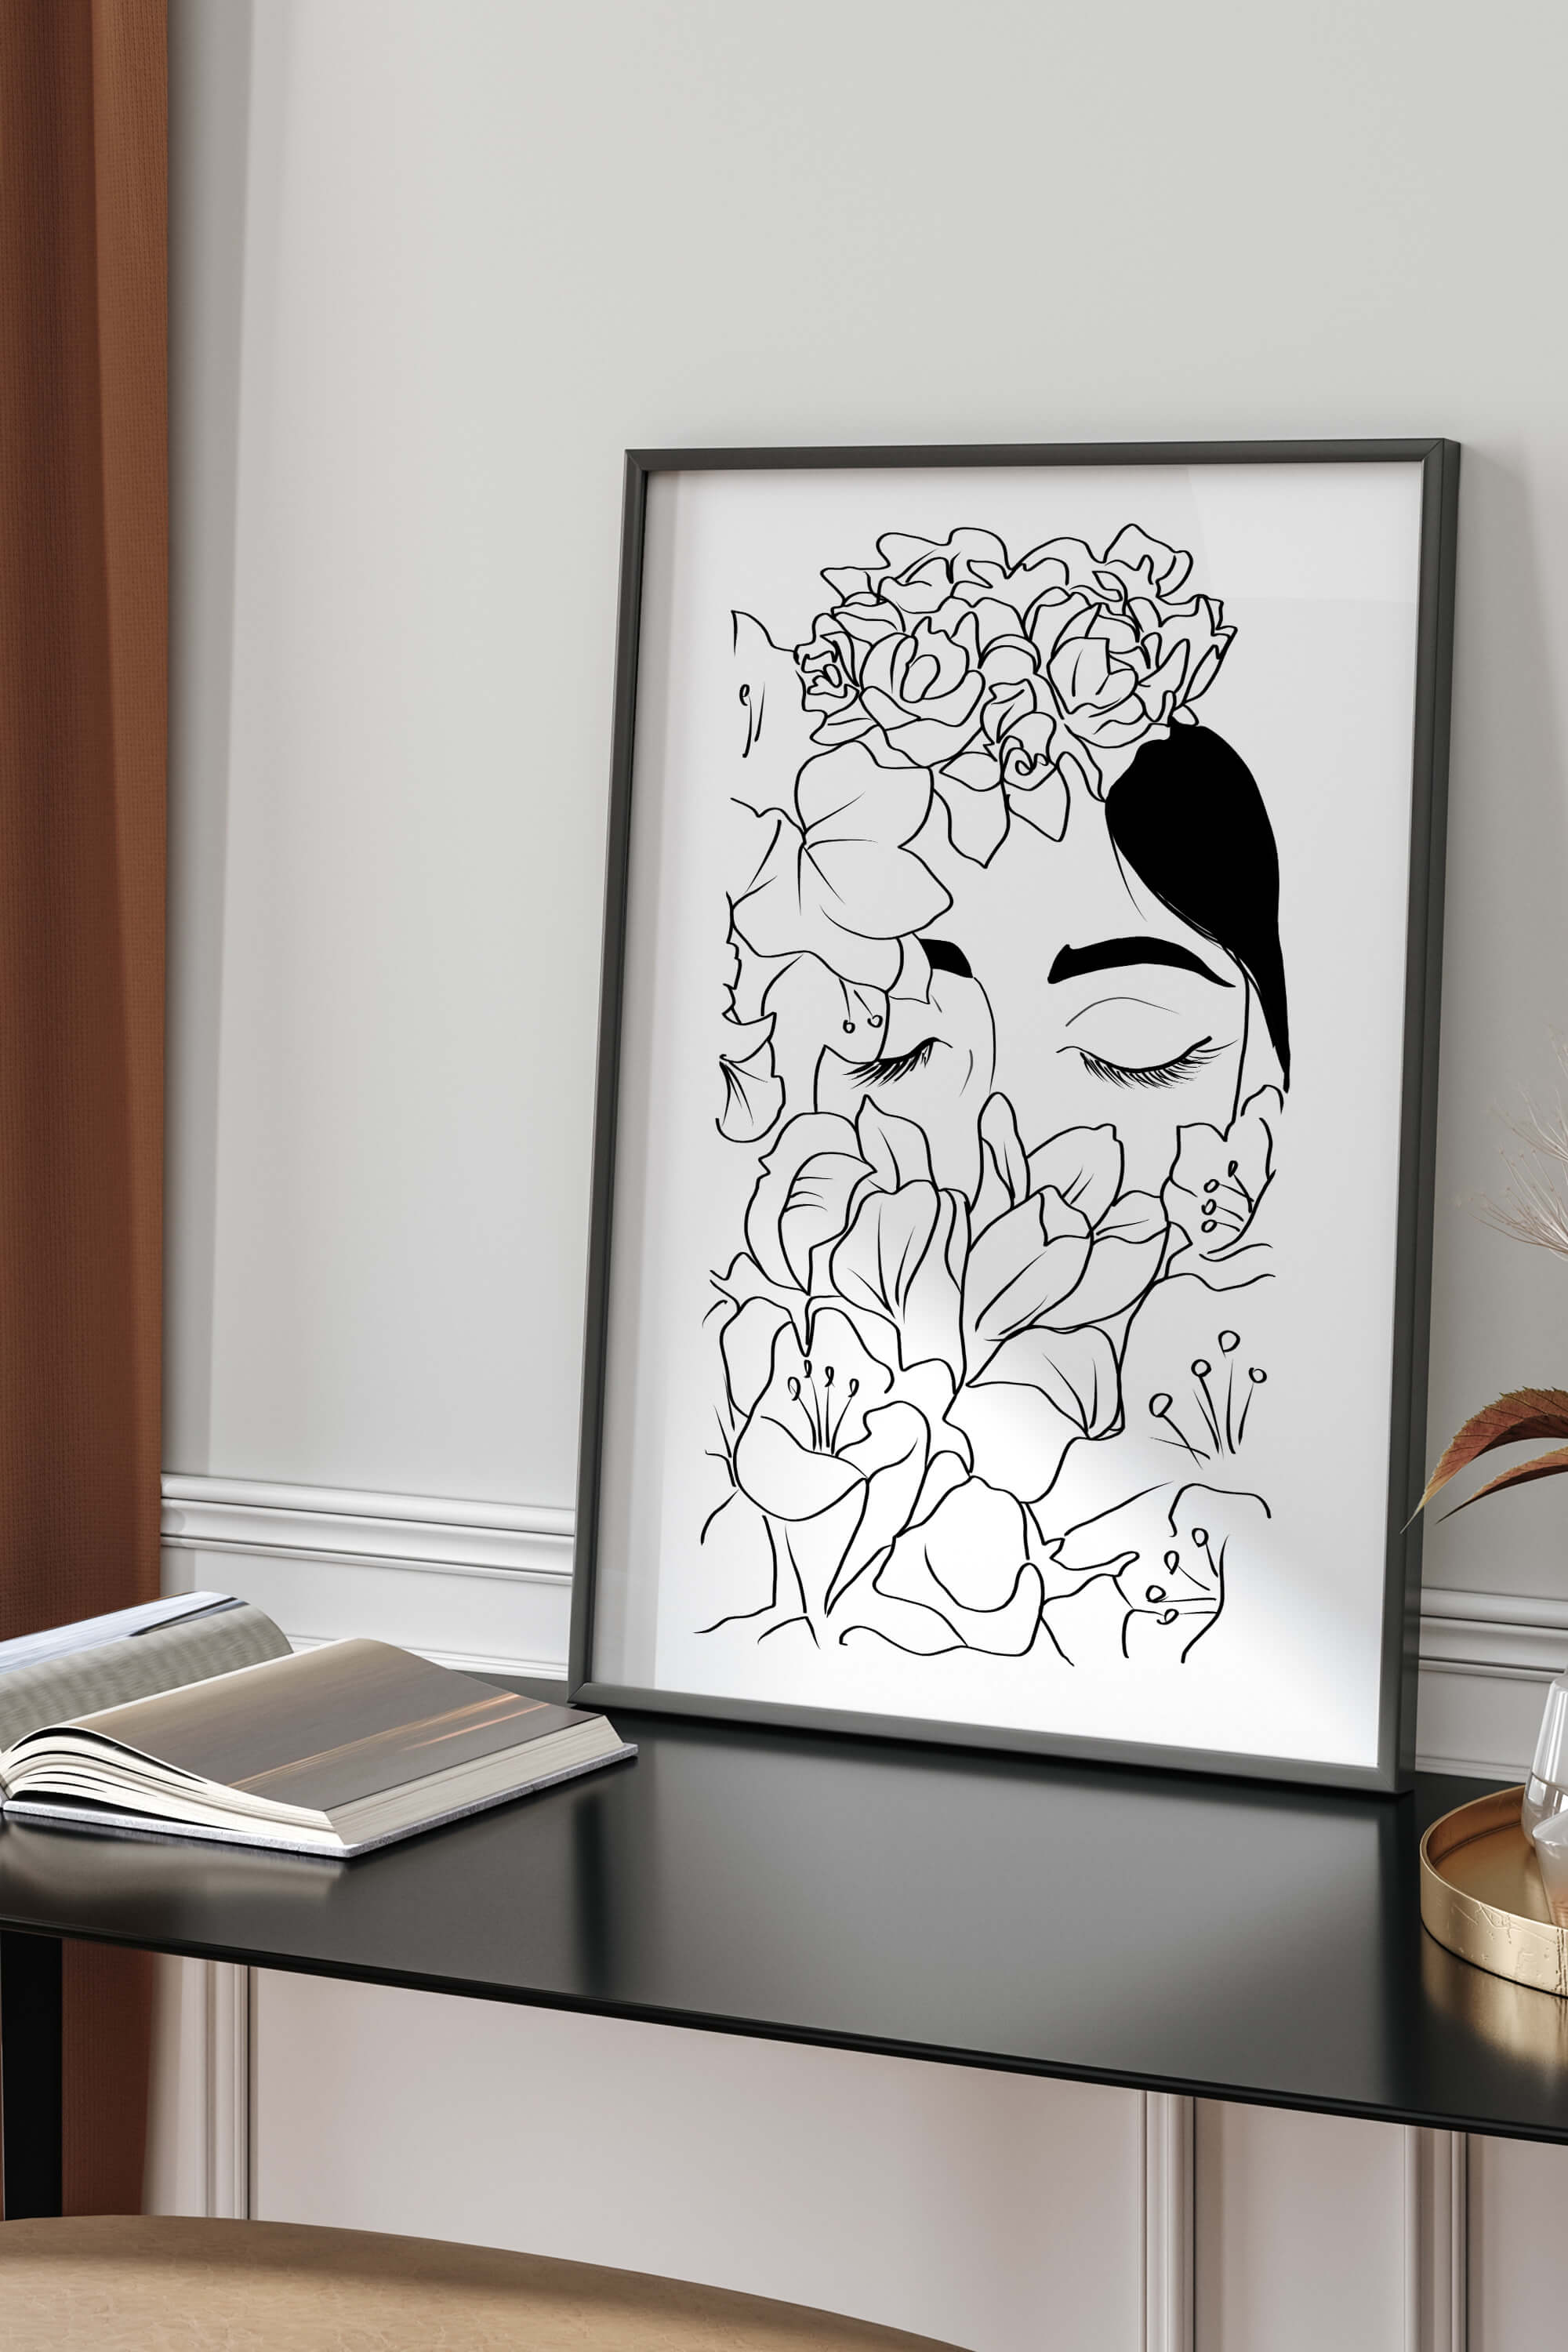 Monochrome elegance captured in a floral line art print, symbolizing empowerment. Versatile and sophisticated, this print leaves a lasting impression on walls and hearts alike.